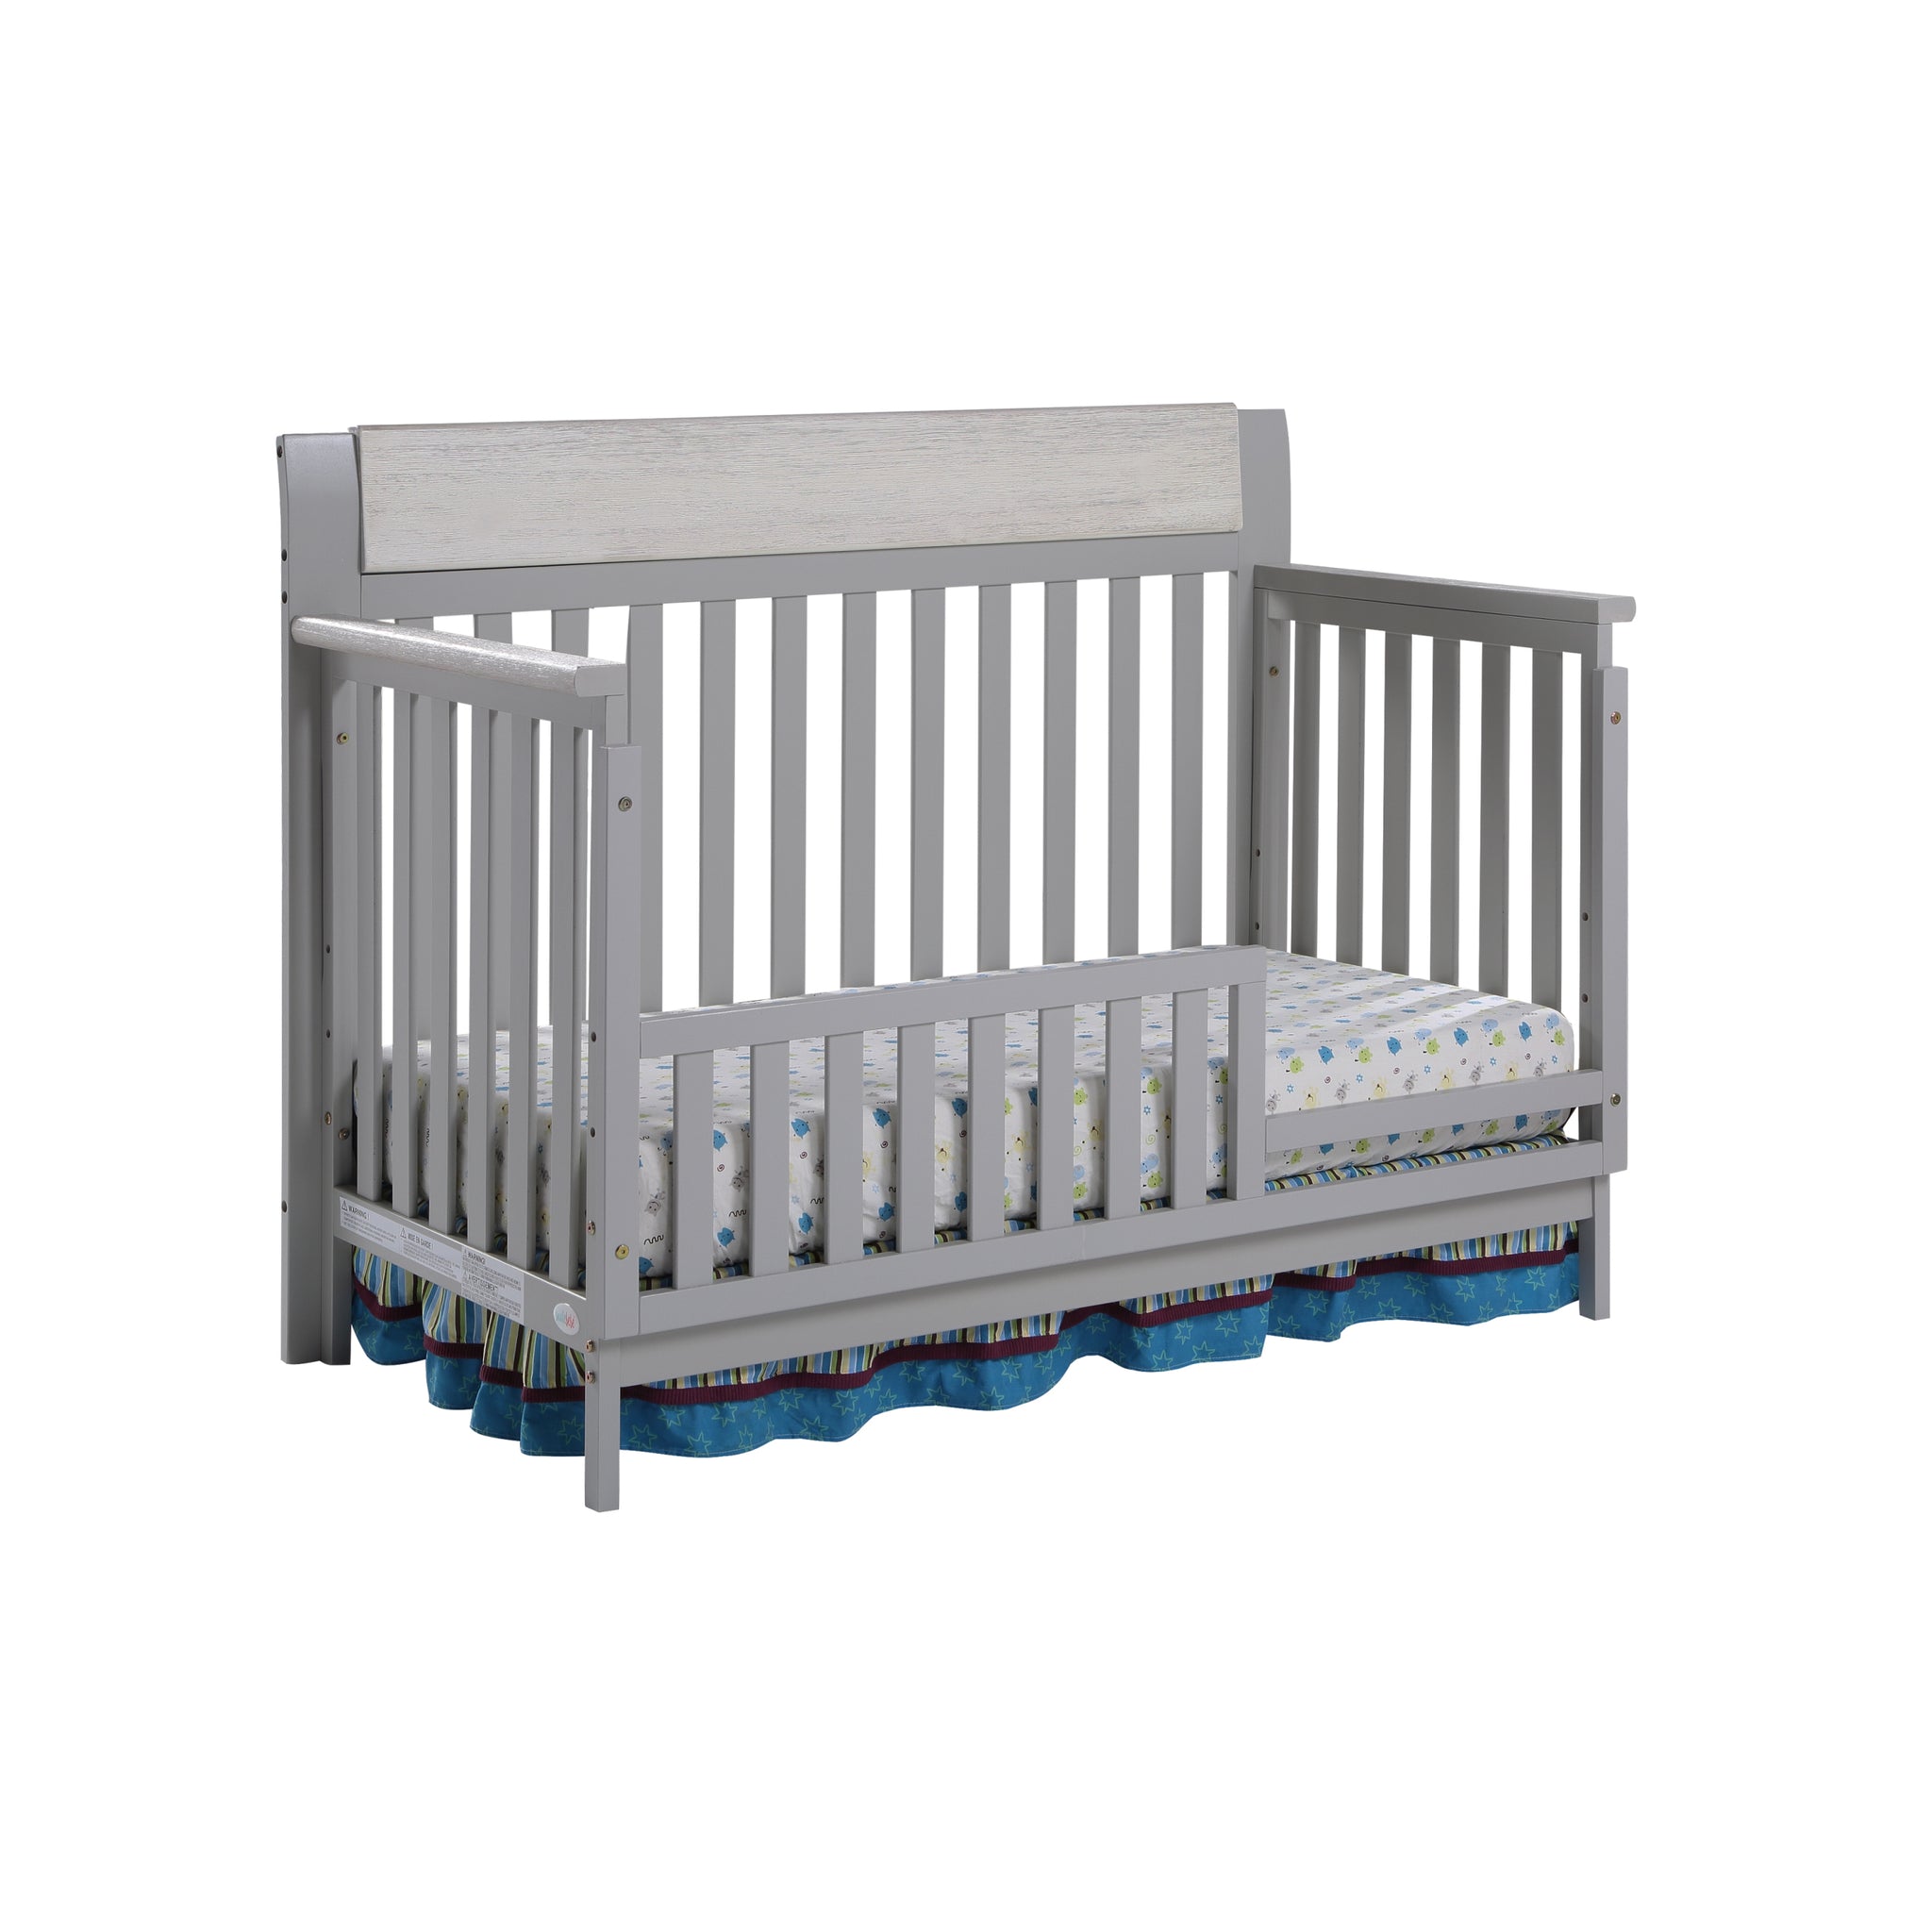 Hayes 4 in 1 Convertible Crib Gray Weathered Granite gray-solid wood